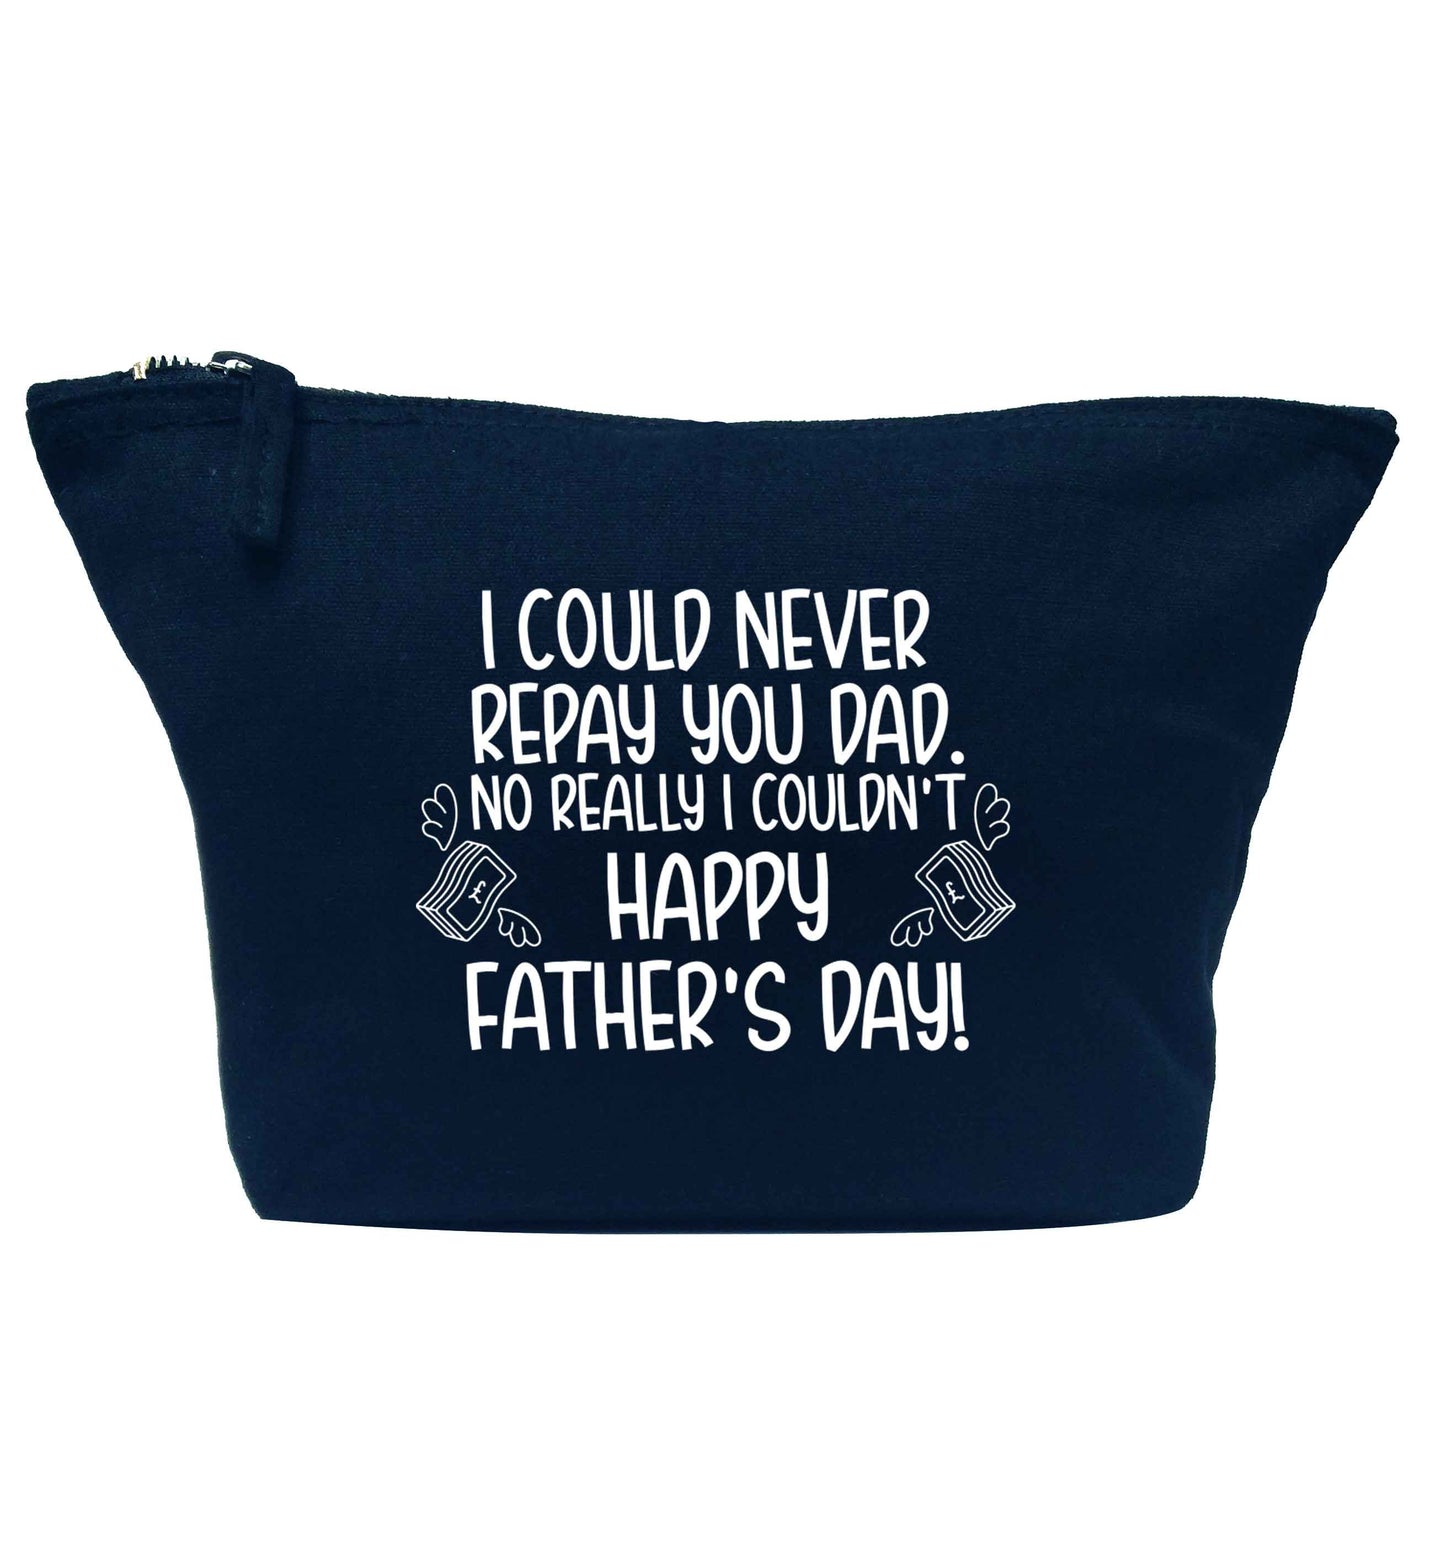 I could never repay you dad. No I really couldn't happy Father's day! navy makeup bag